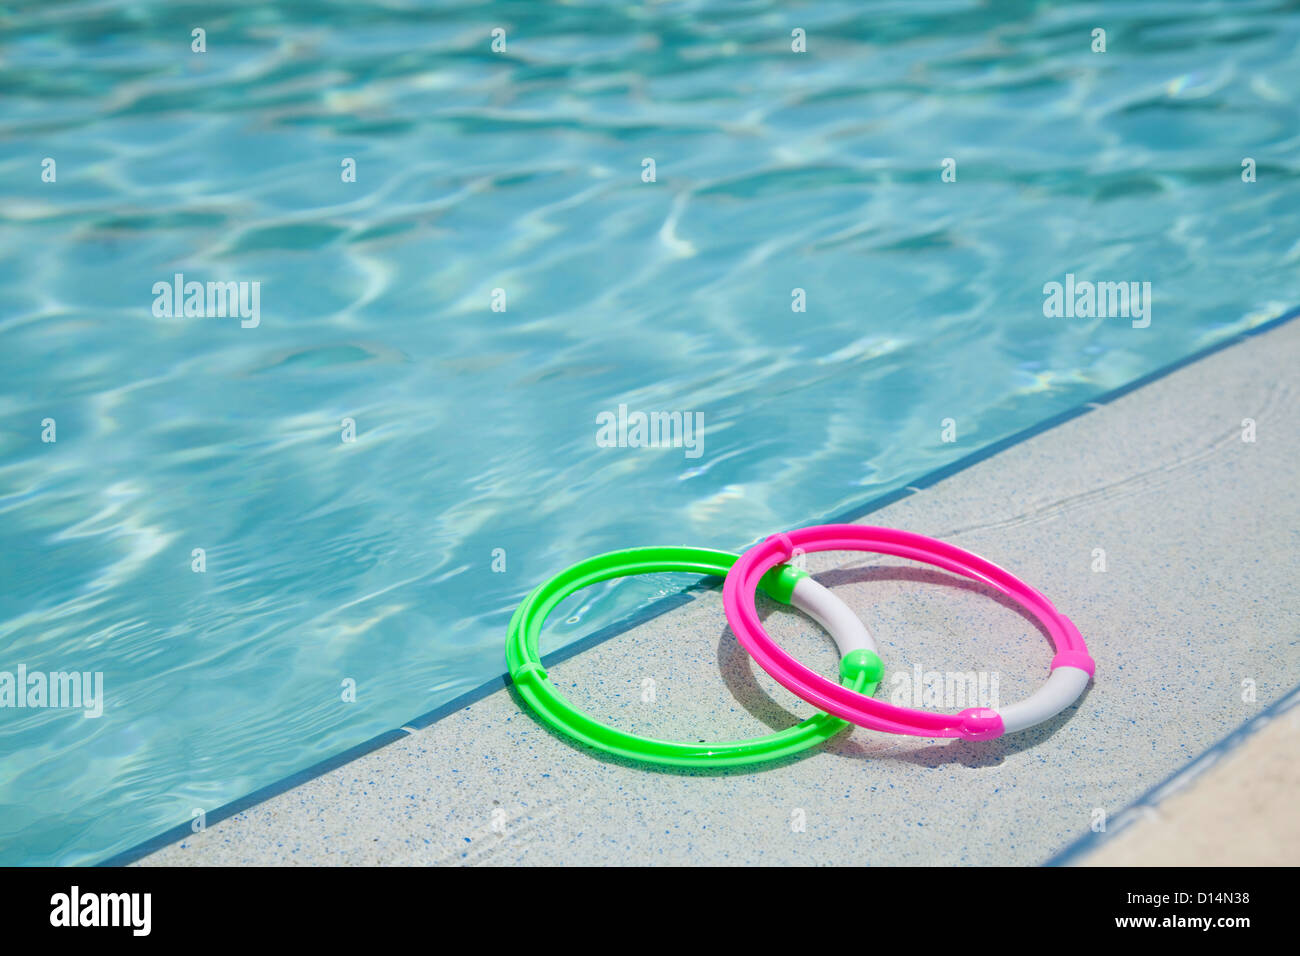 USA, Florida, St. Petersburg, two rings on poolside Stock Photo